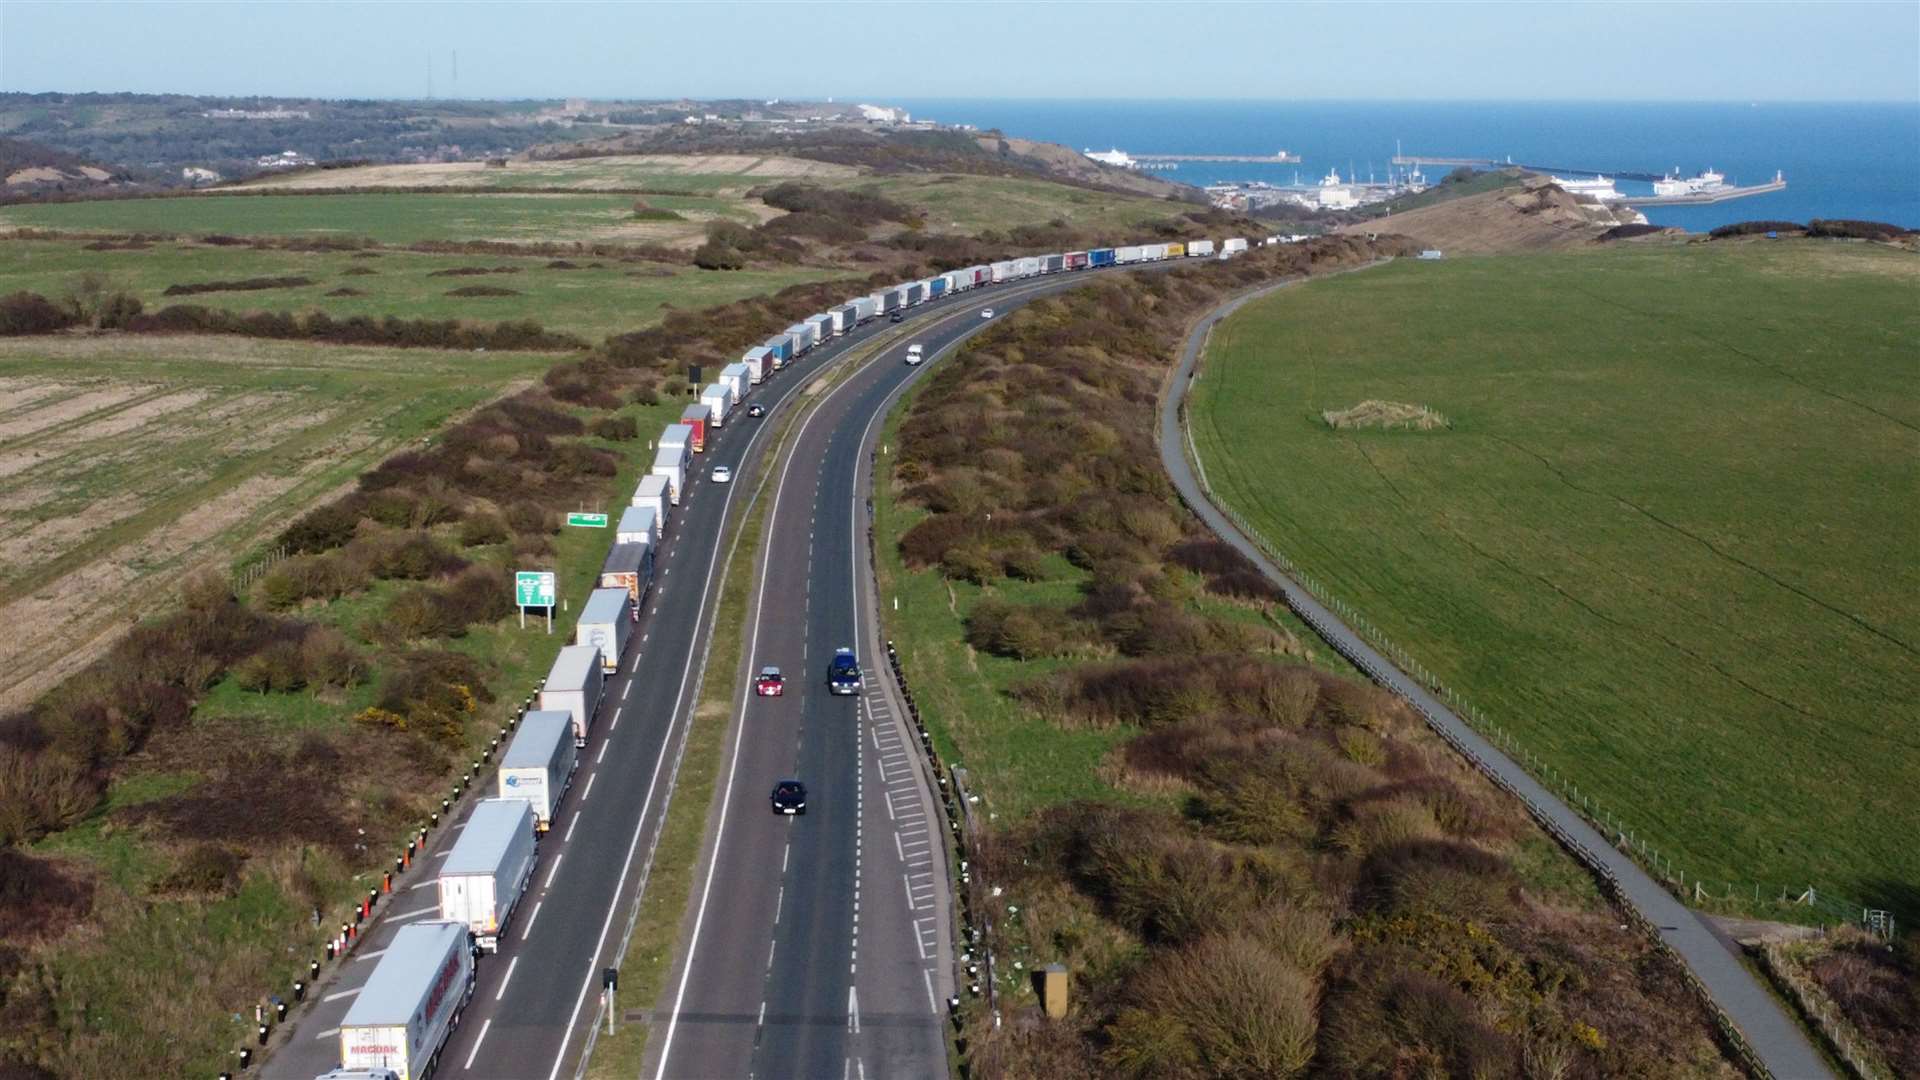 Long line of lorries wait on the A20 heading into Dover, as part of TAP, after P&O Ferries announced the suspension of their services. Picture: Barry Goodwin